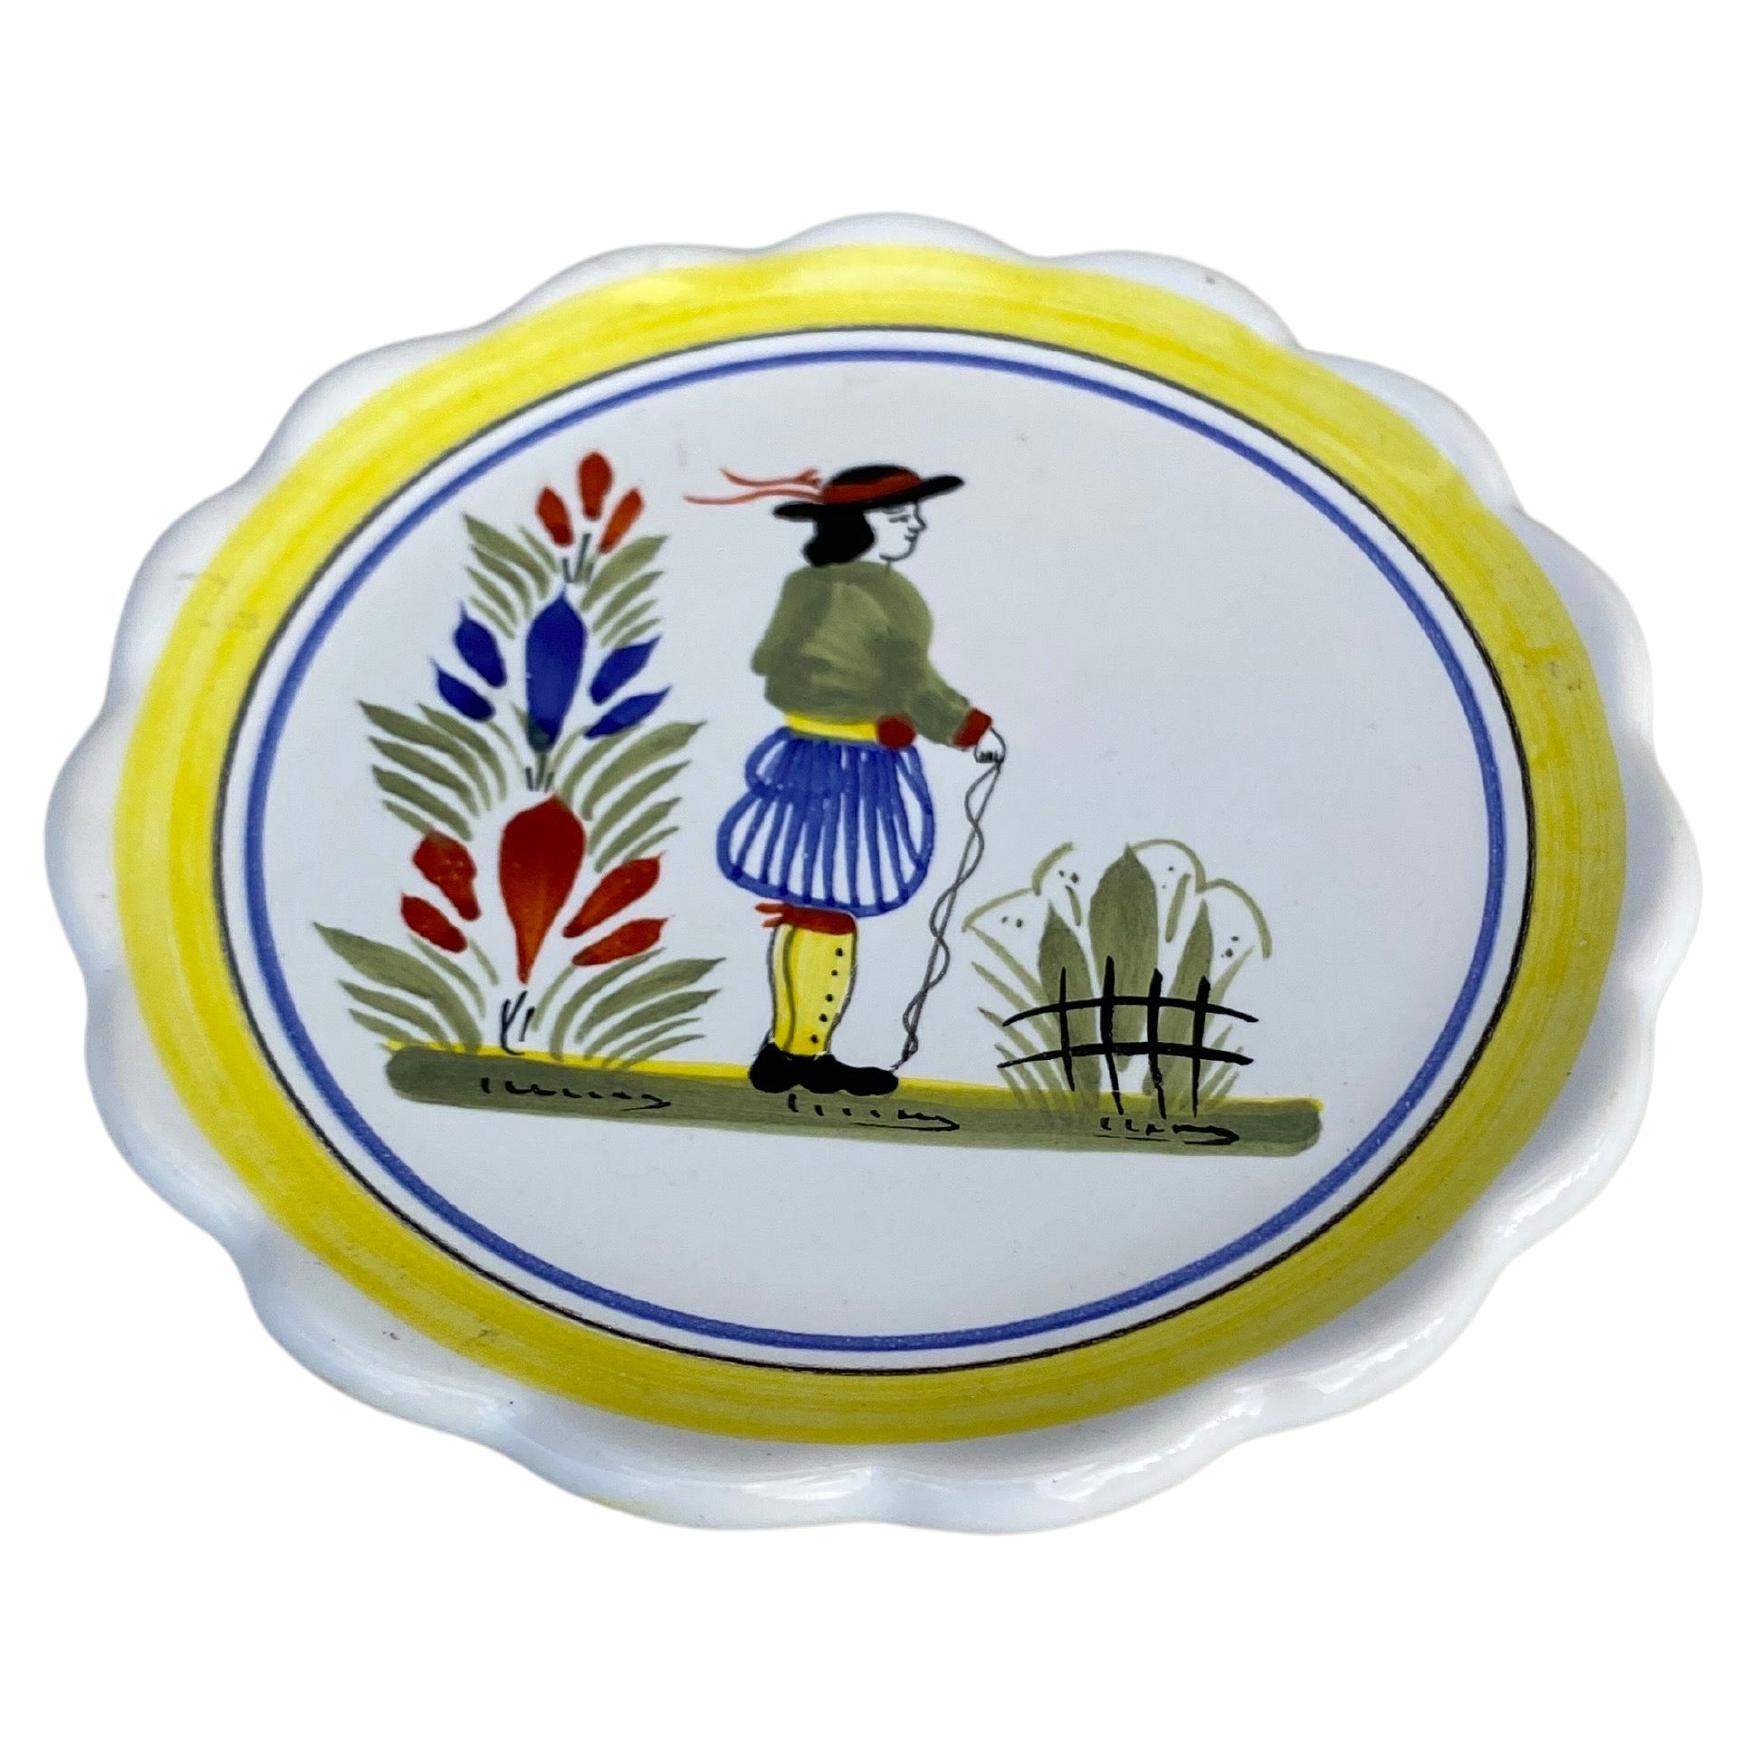 French Miniature Henriot Quimper Plate signed circa 1950.
A breton man is represented on the center with a yellow border.